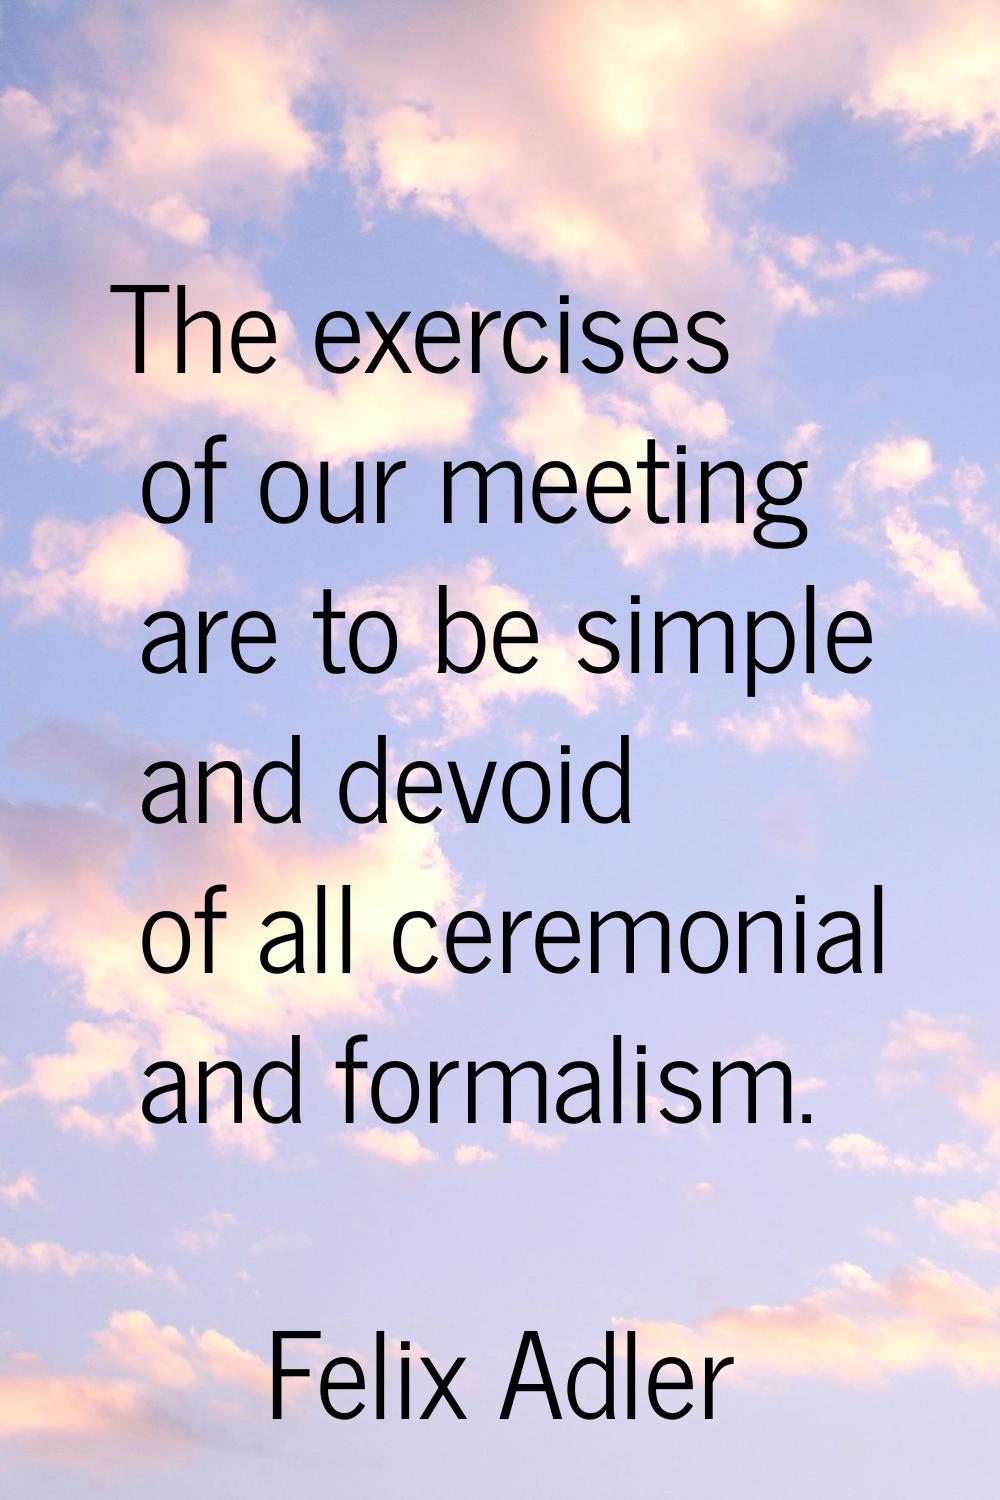 The exercises of our meeting are to be simple and devoid of all ceremonial and formalism.